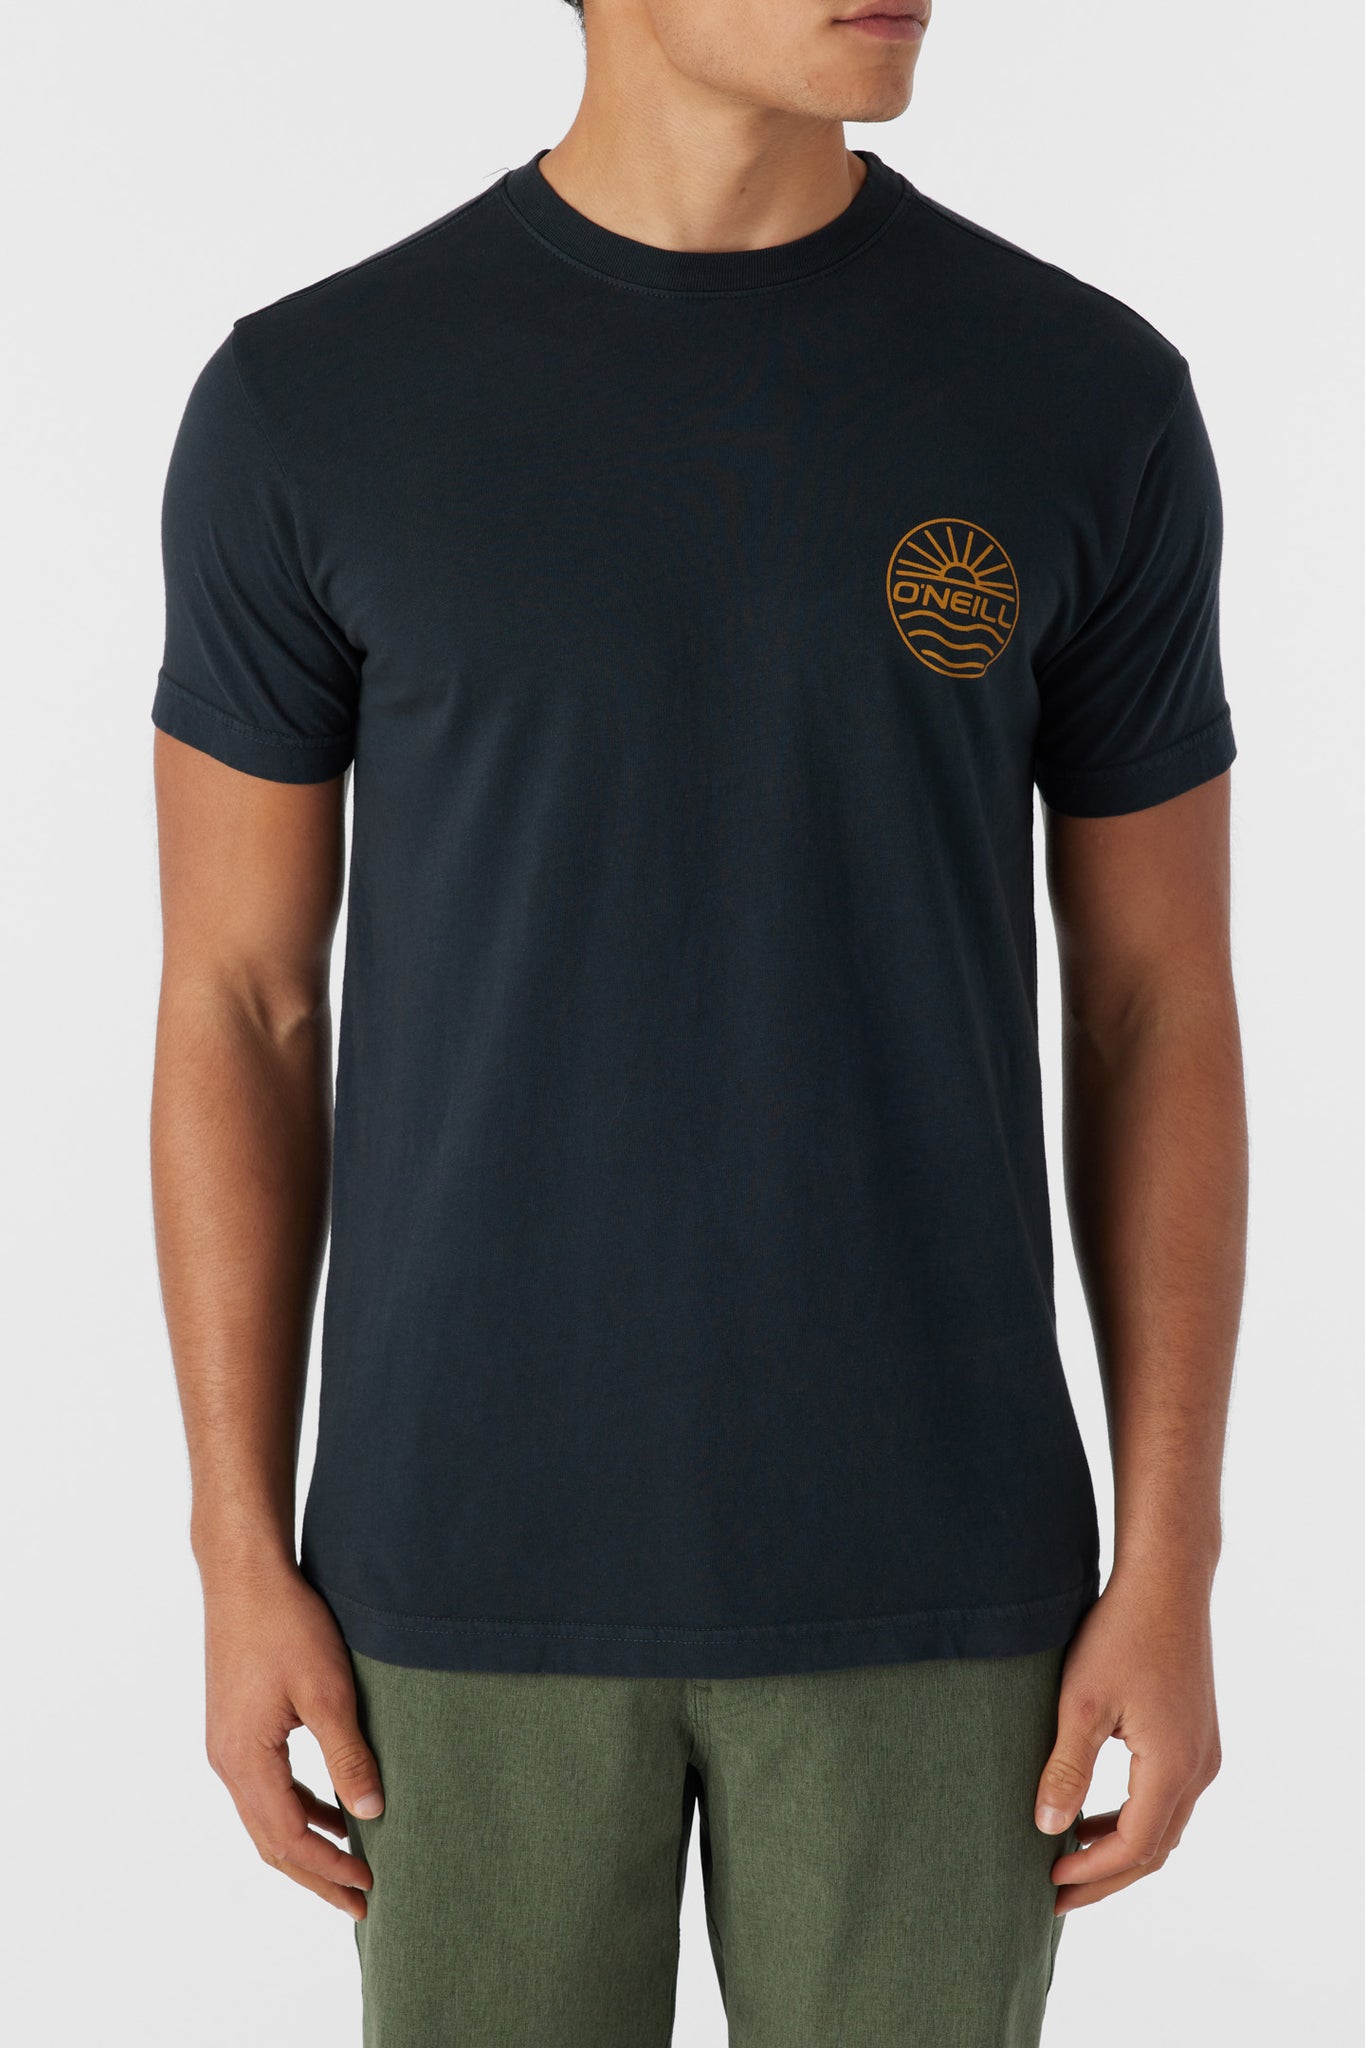 SCENIC TEE BY JORDY SMITH